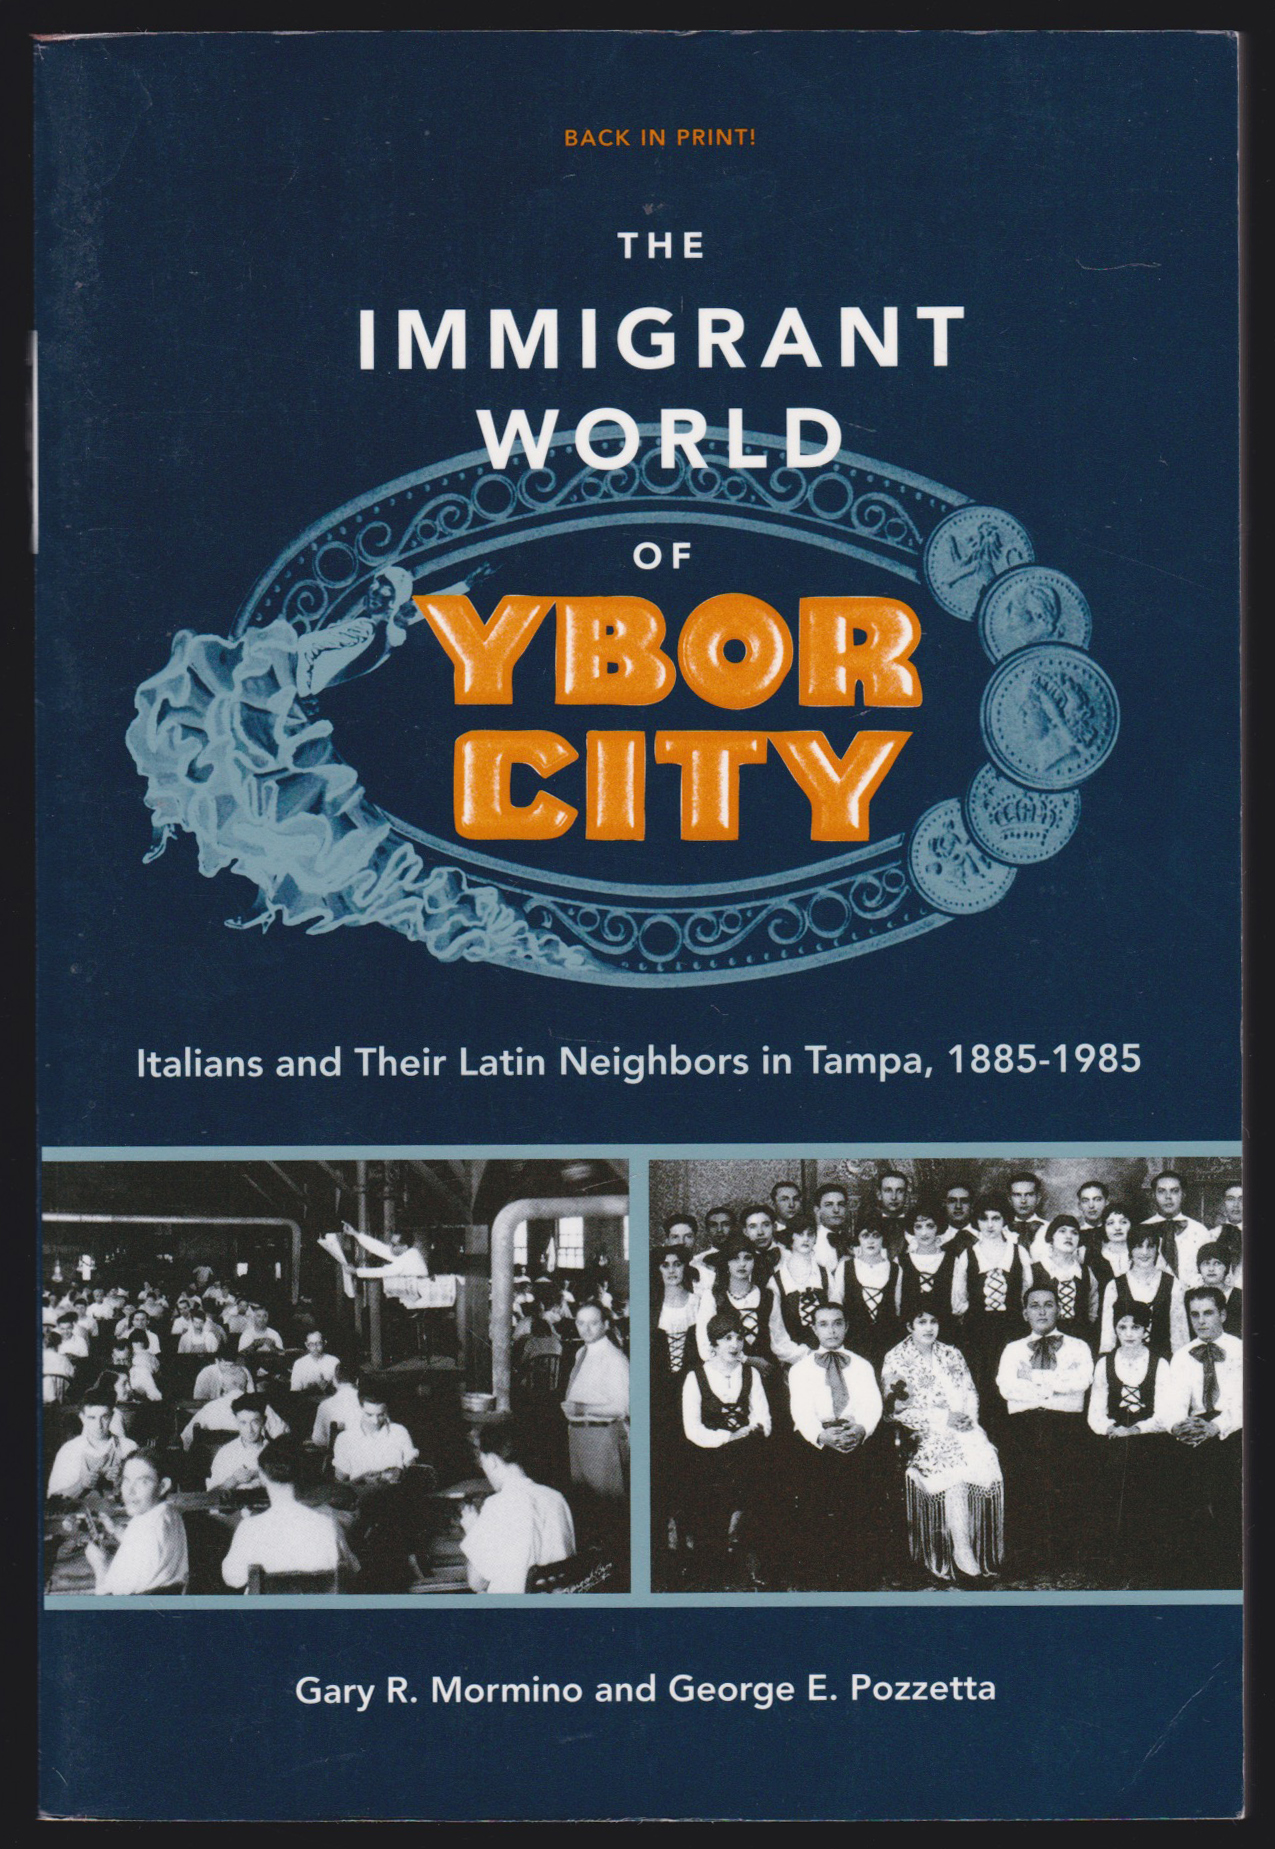 The Immigrant World of Ybor City: Italians and Their Latin Neighbors in Tampa, 1885-1985 - Gary R. Mormino; George E. Pozzetta